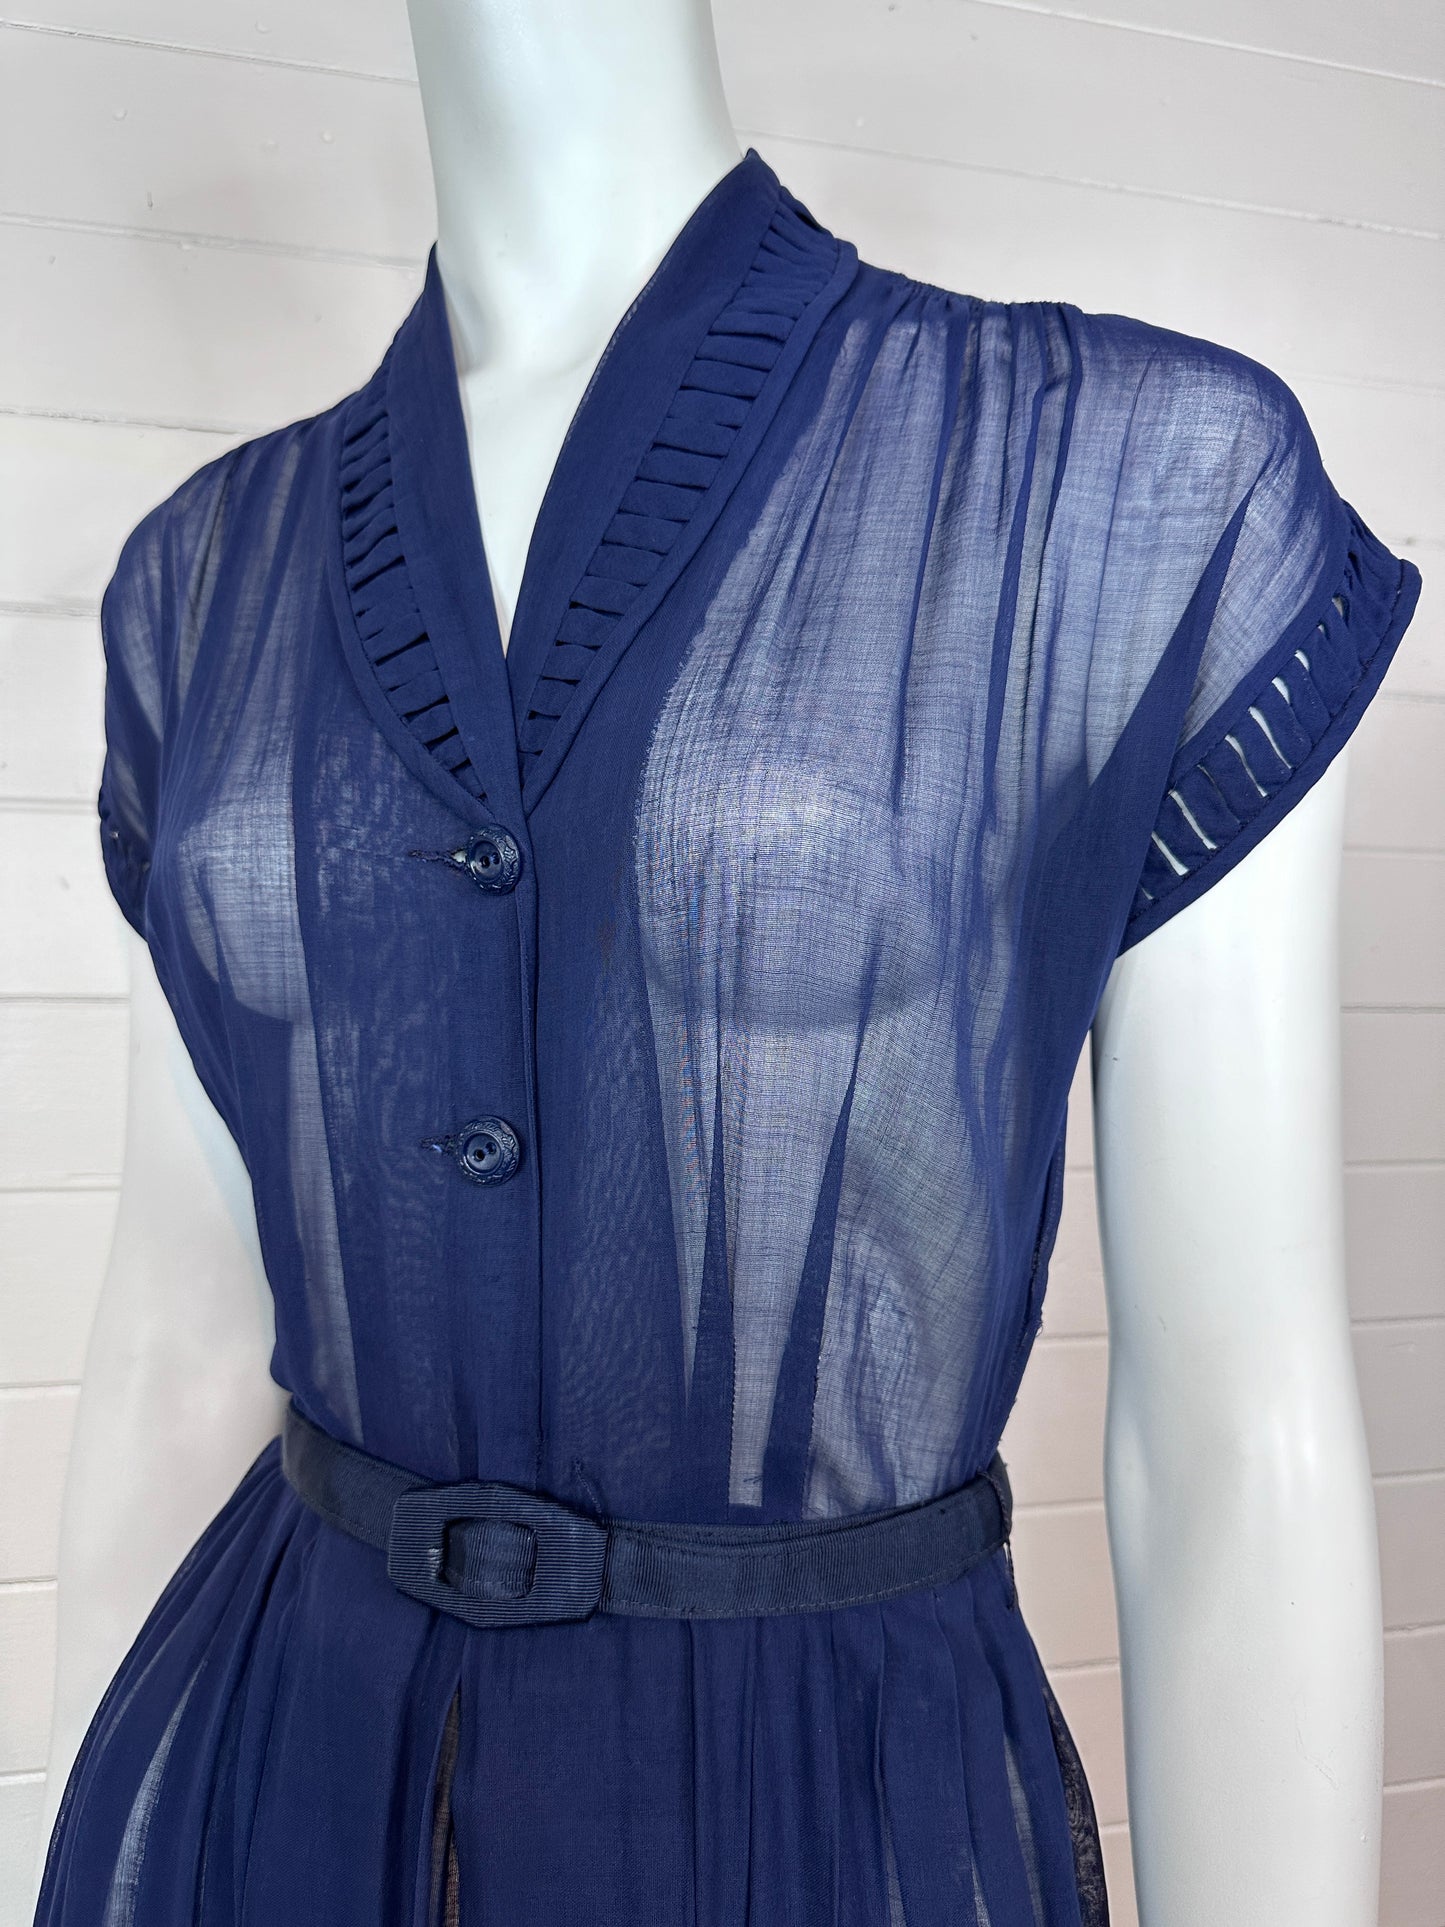 1940's Sheer Navy Shirtwaist Day Dress with Pleated Skirt (S-M)